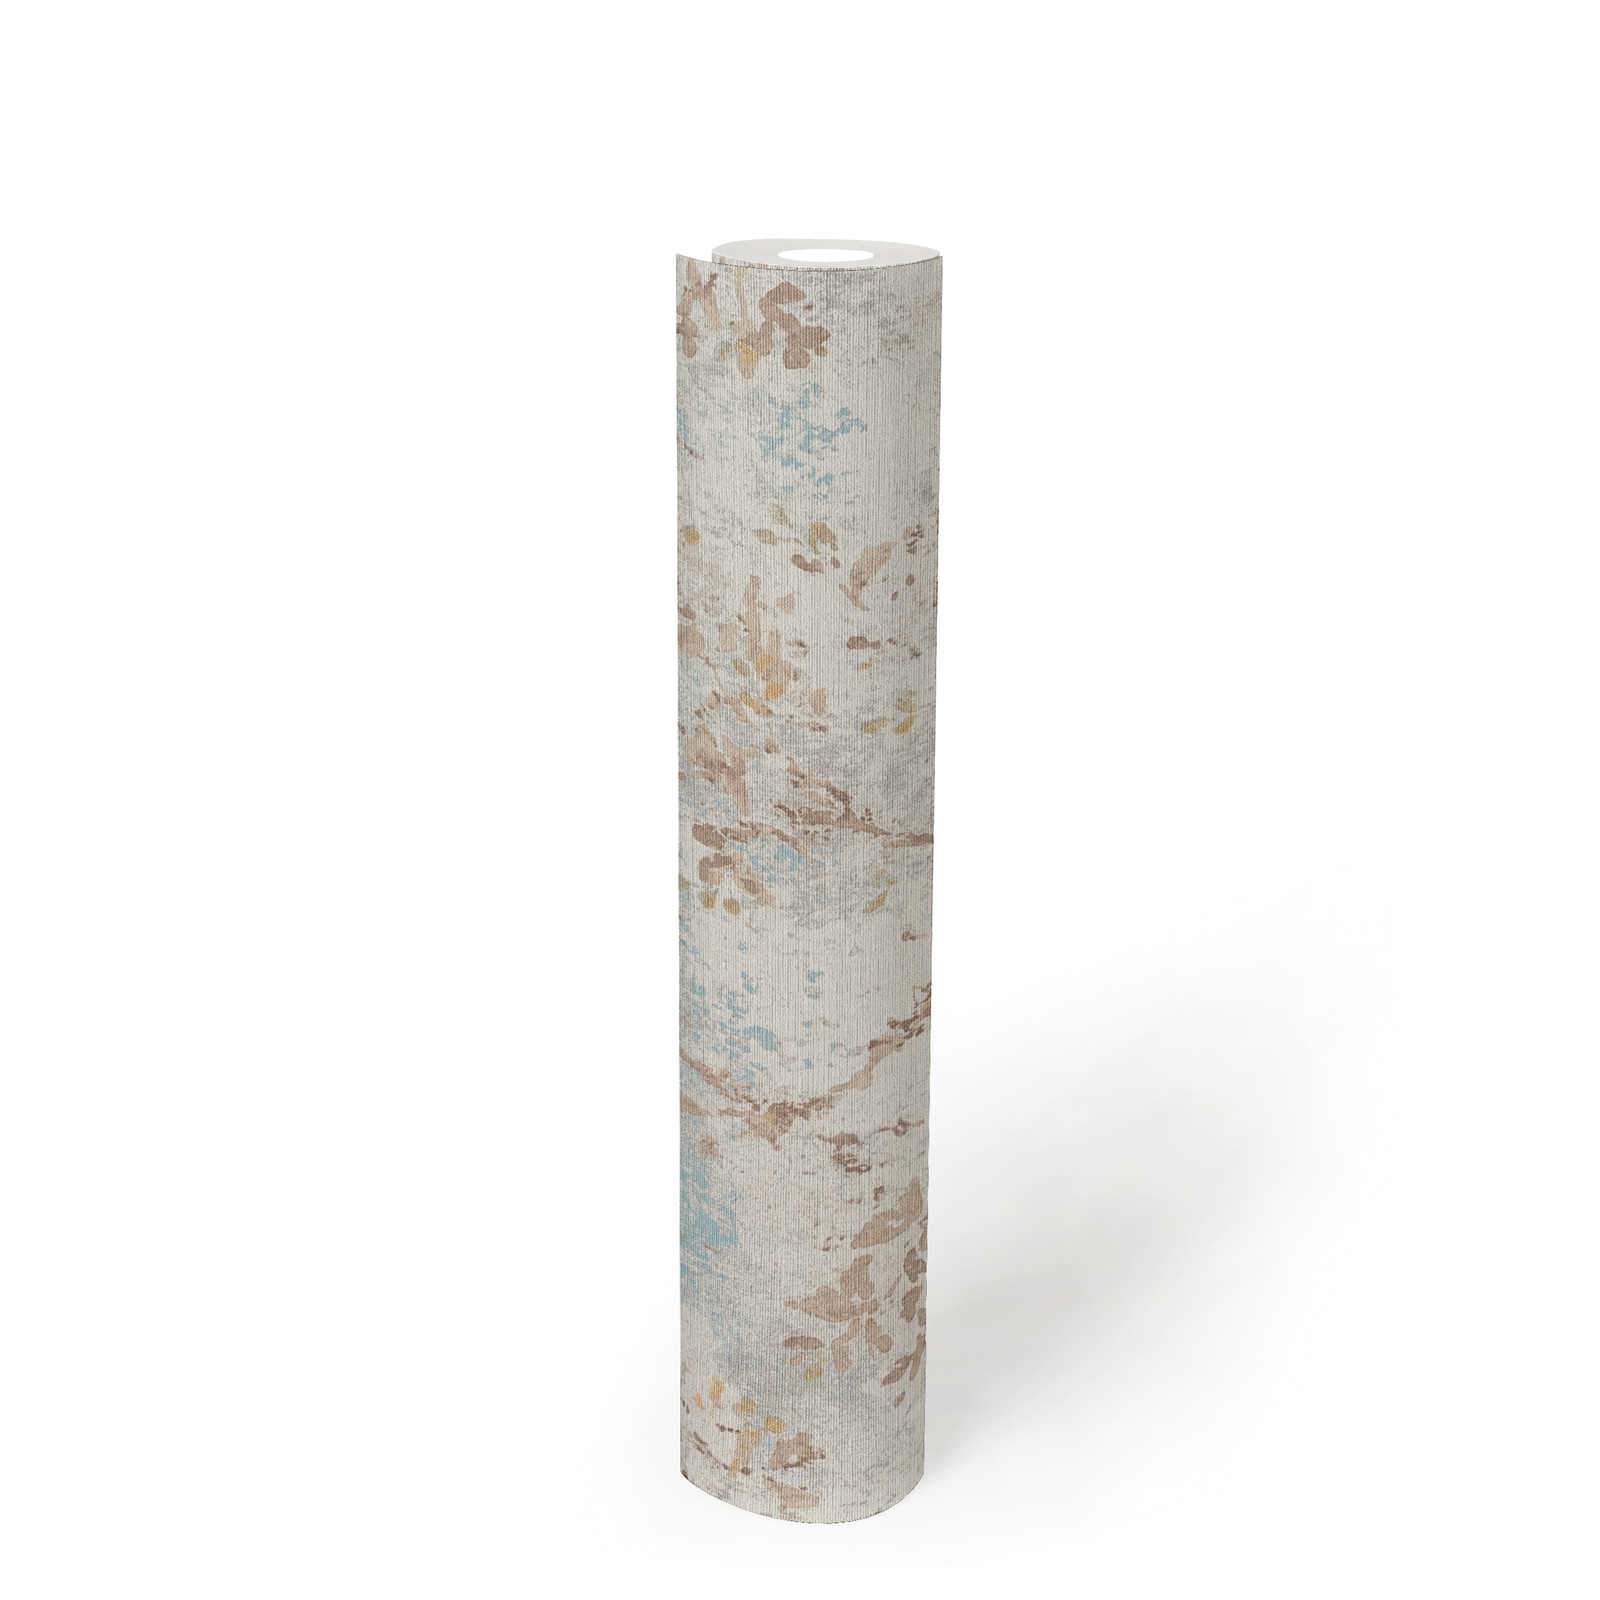             Non-woven wallpaper with a floral watercolour look - blue, beige, gold
        